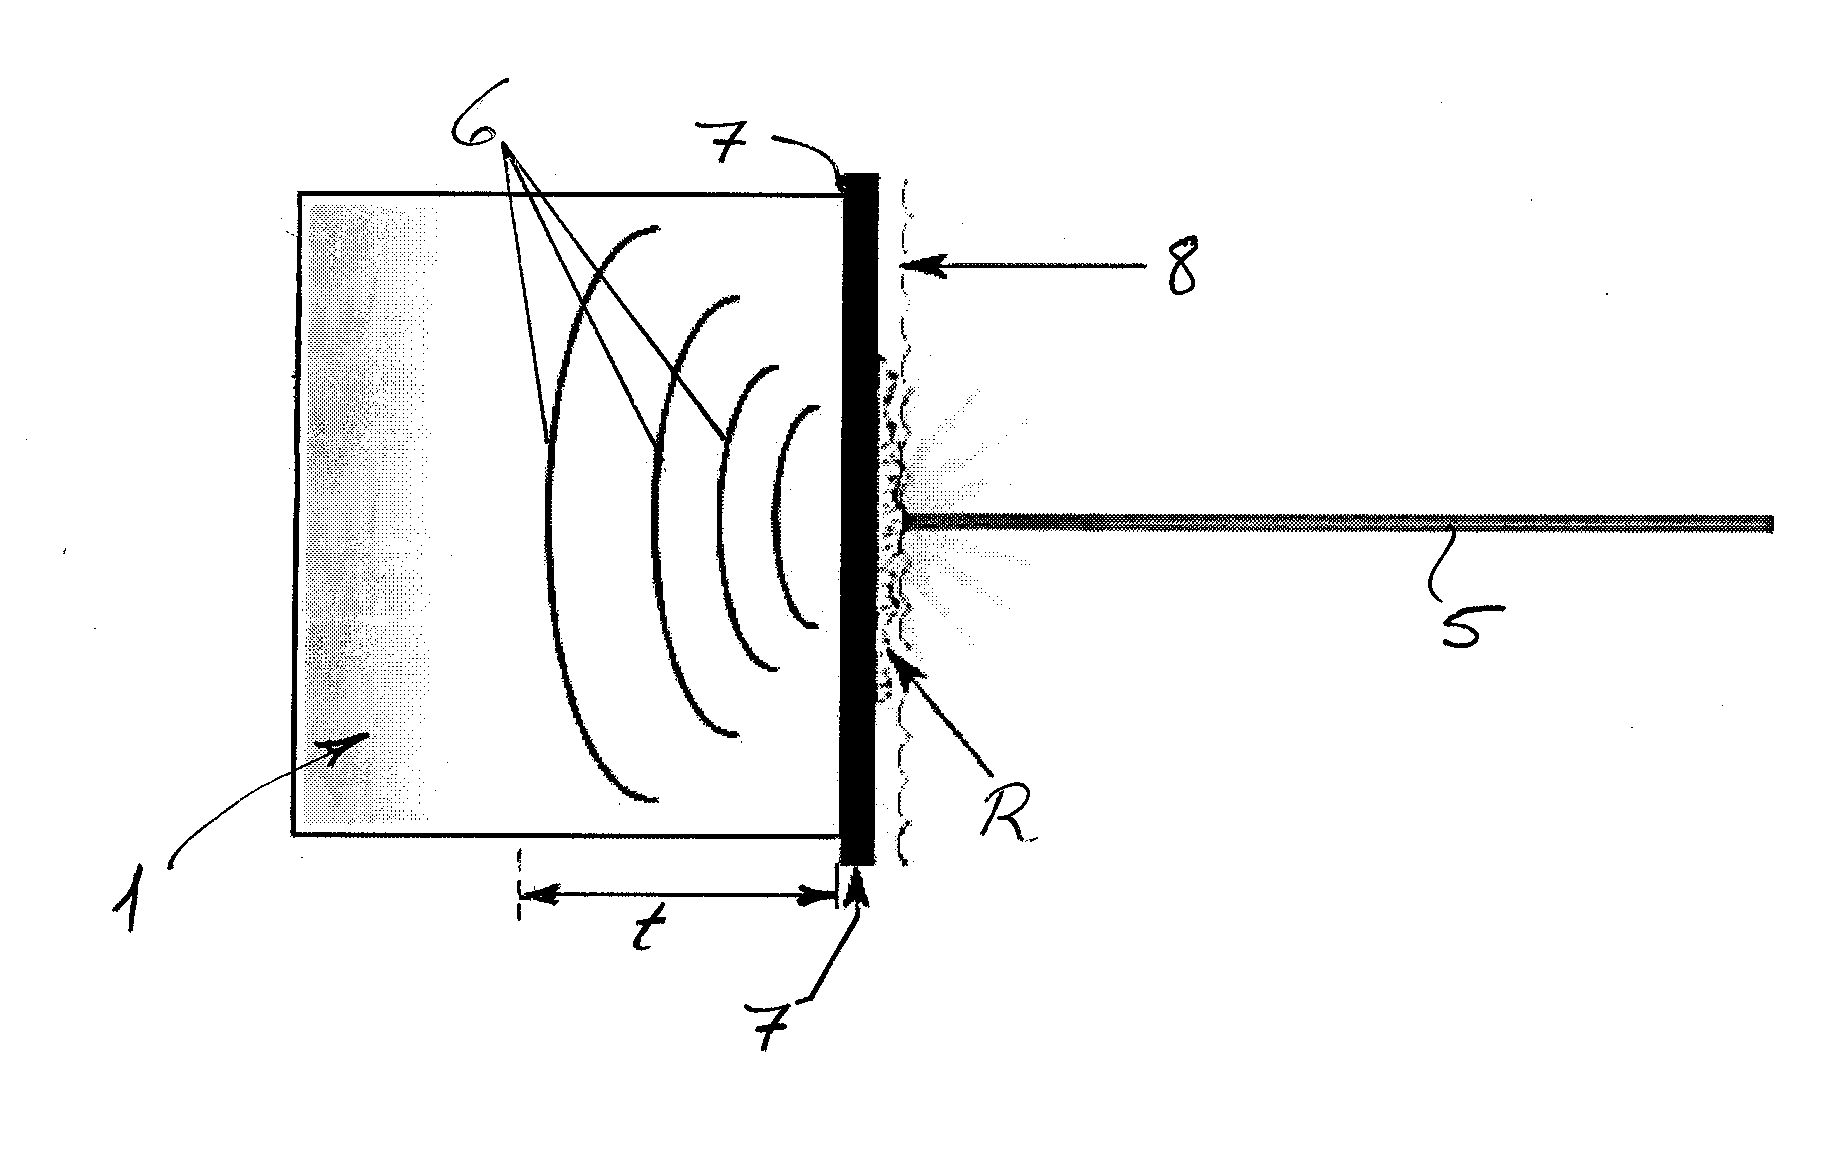 Method and system for fabricating a module